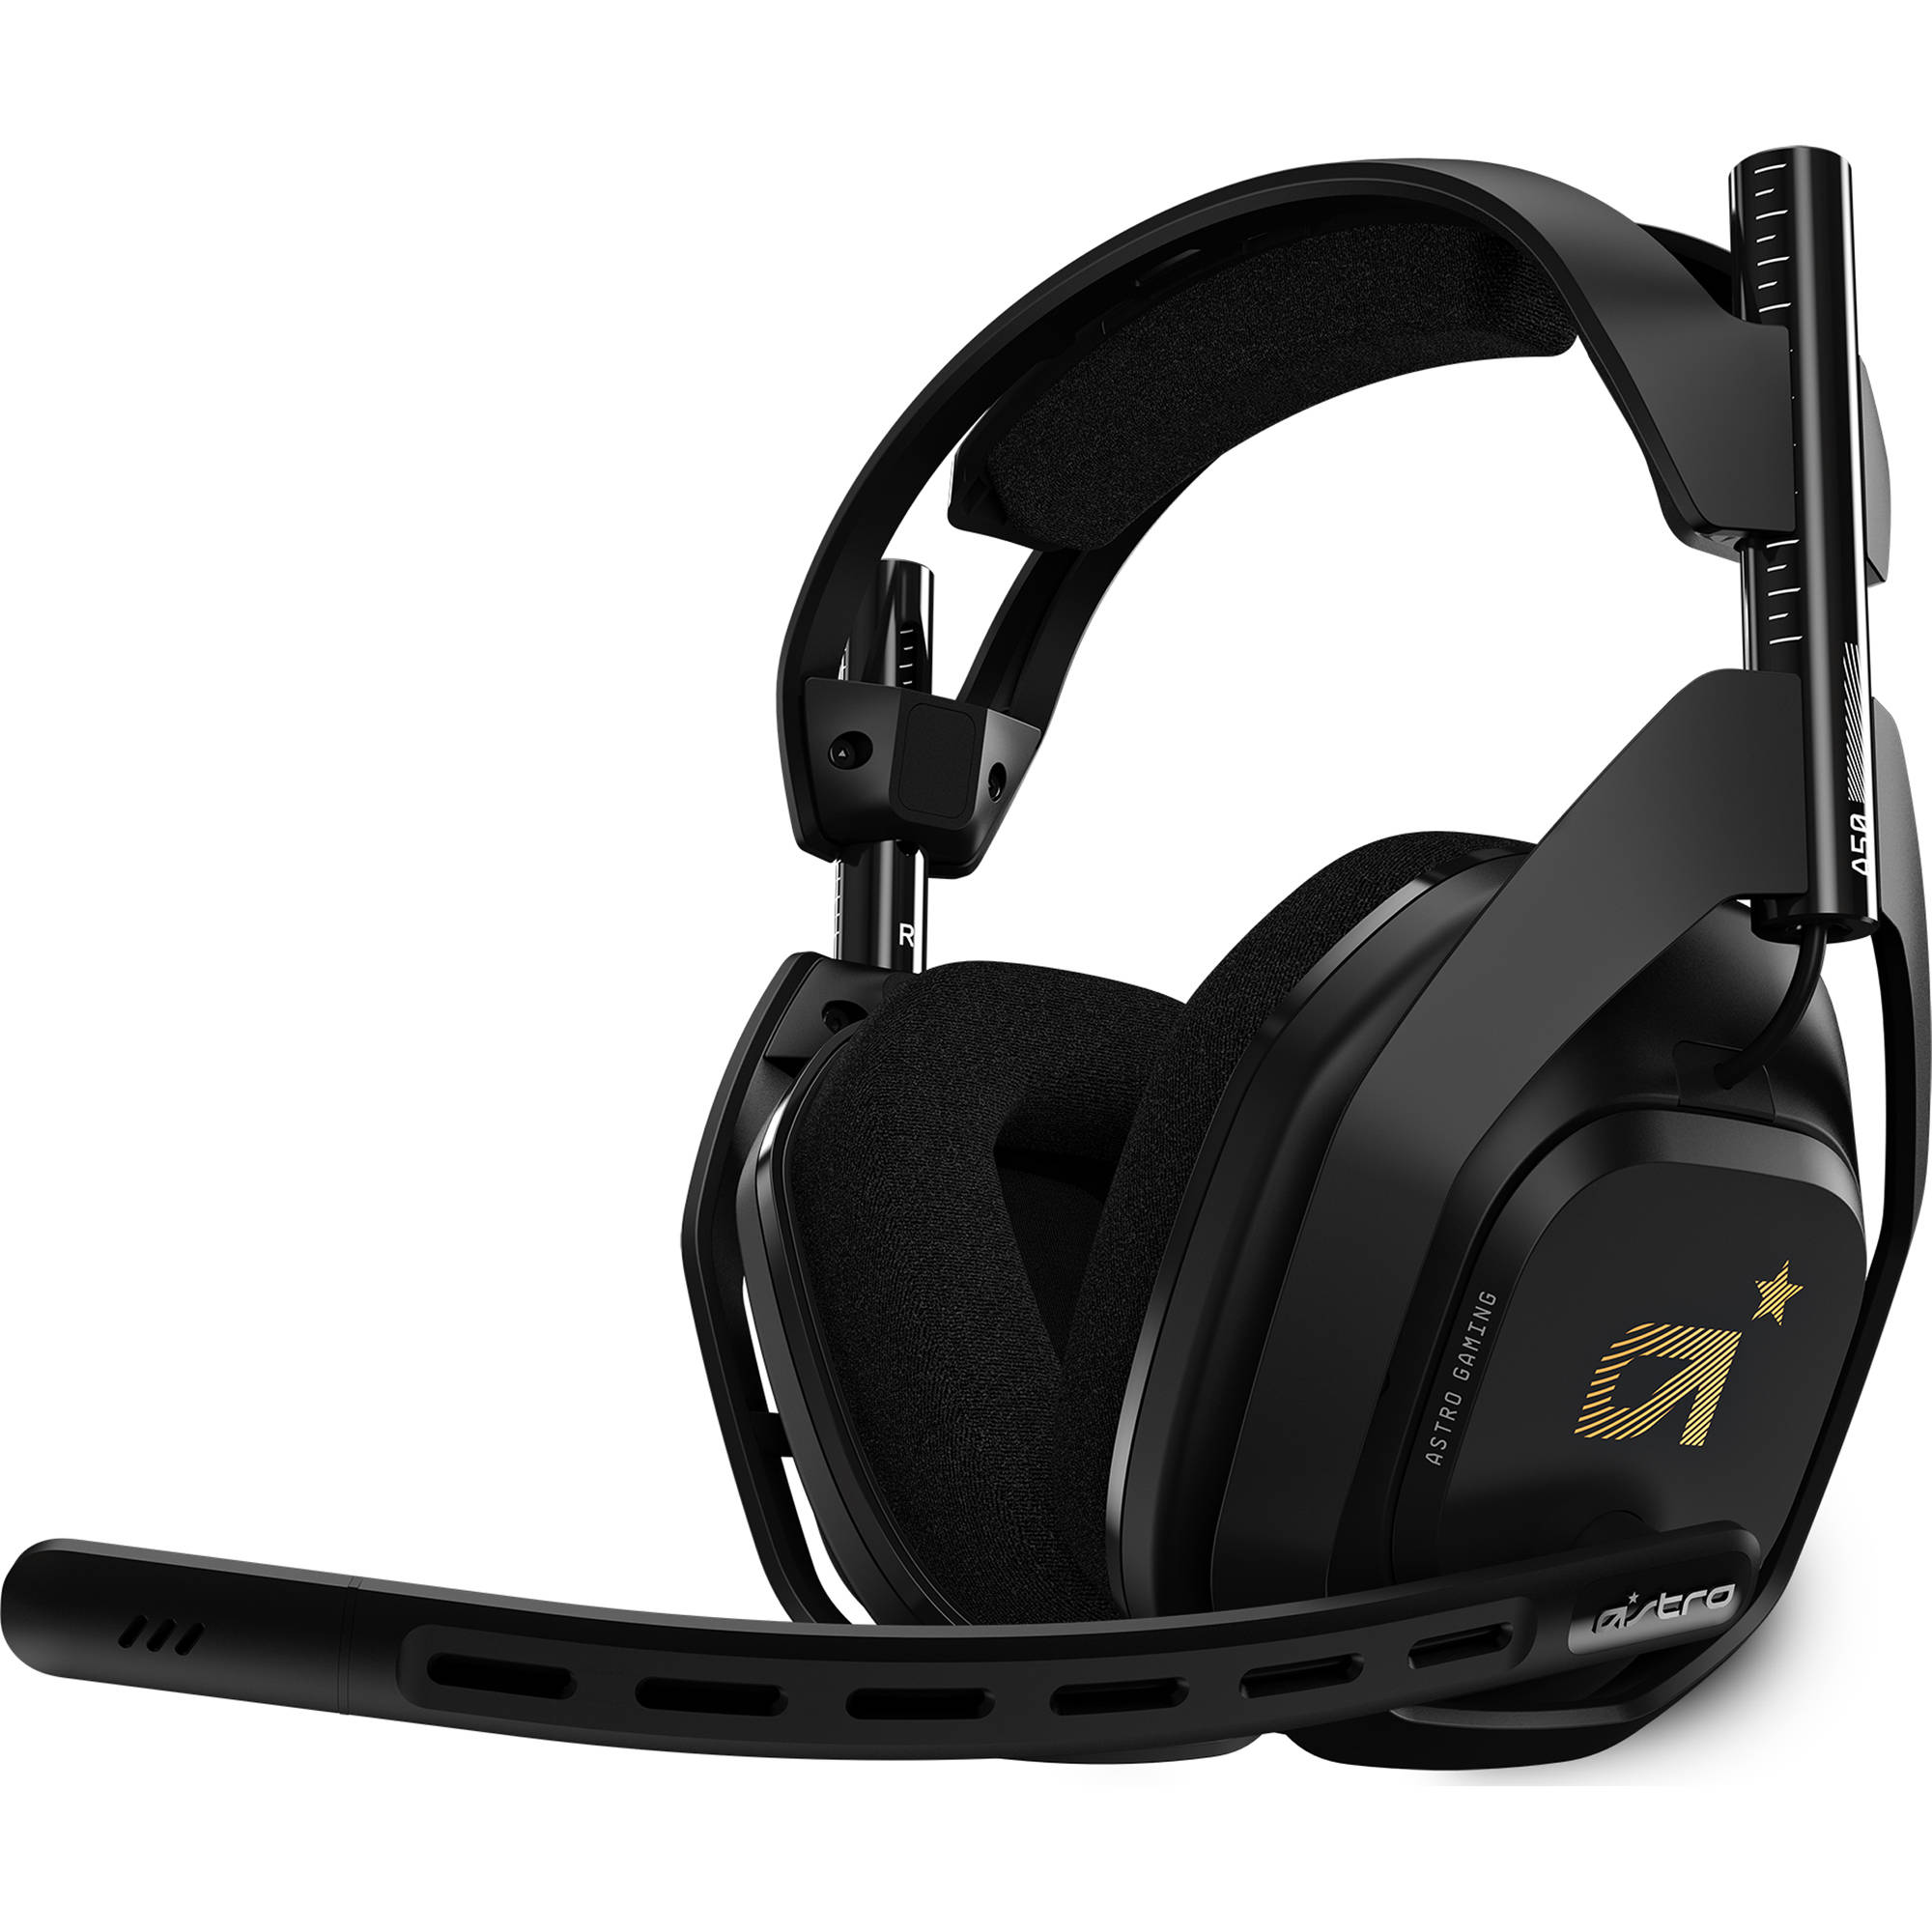 connecting astro a50 to xbox one